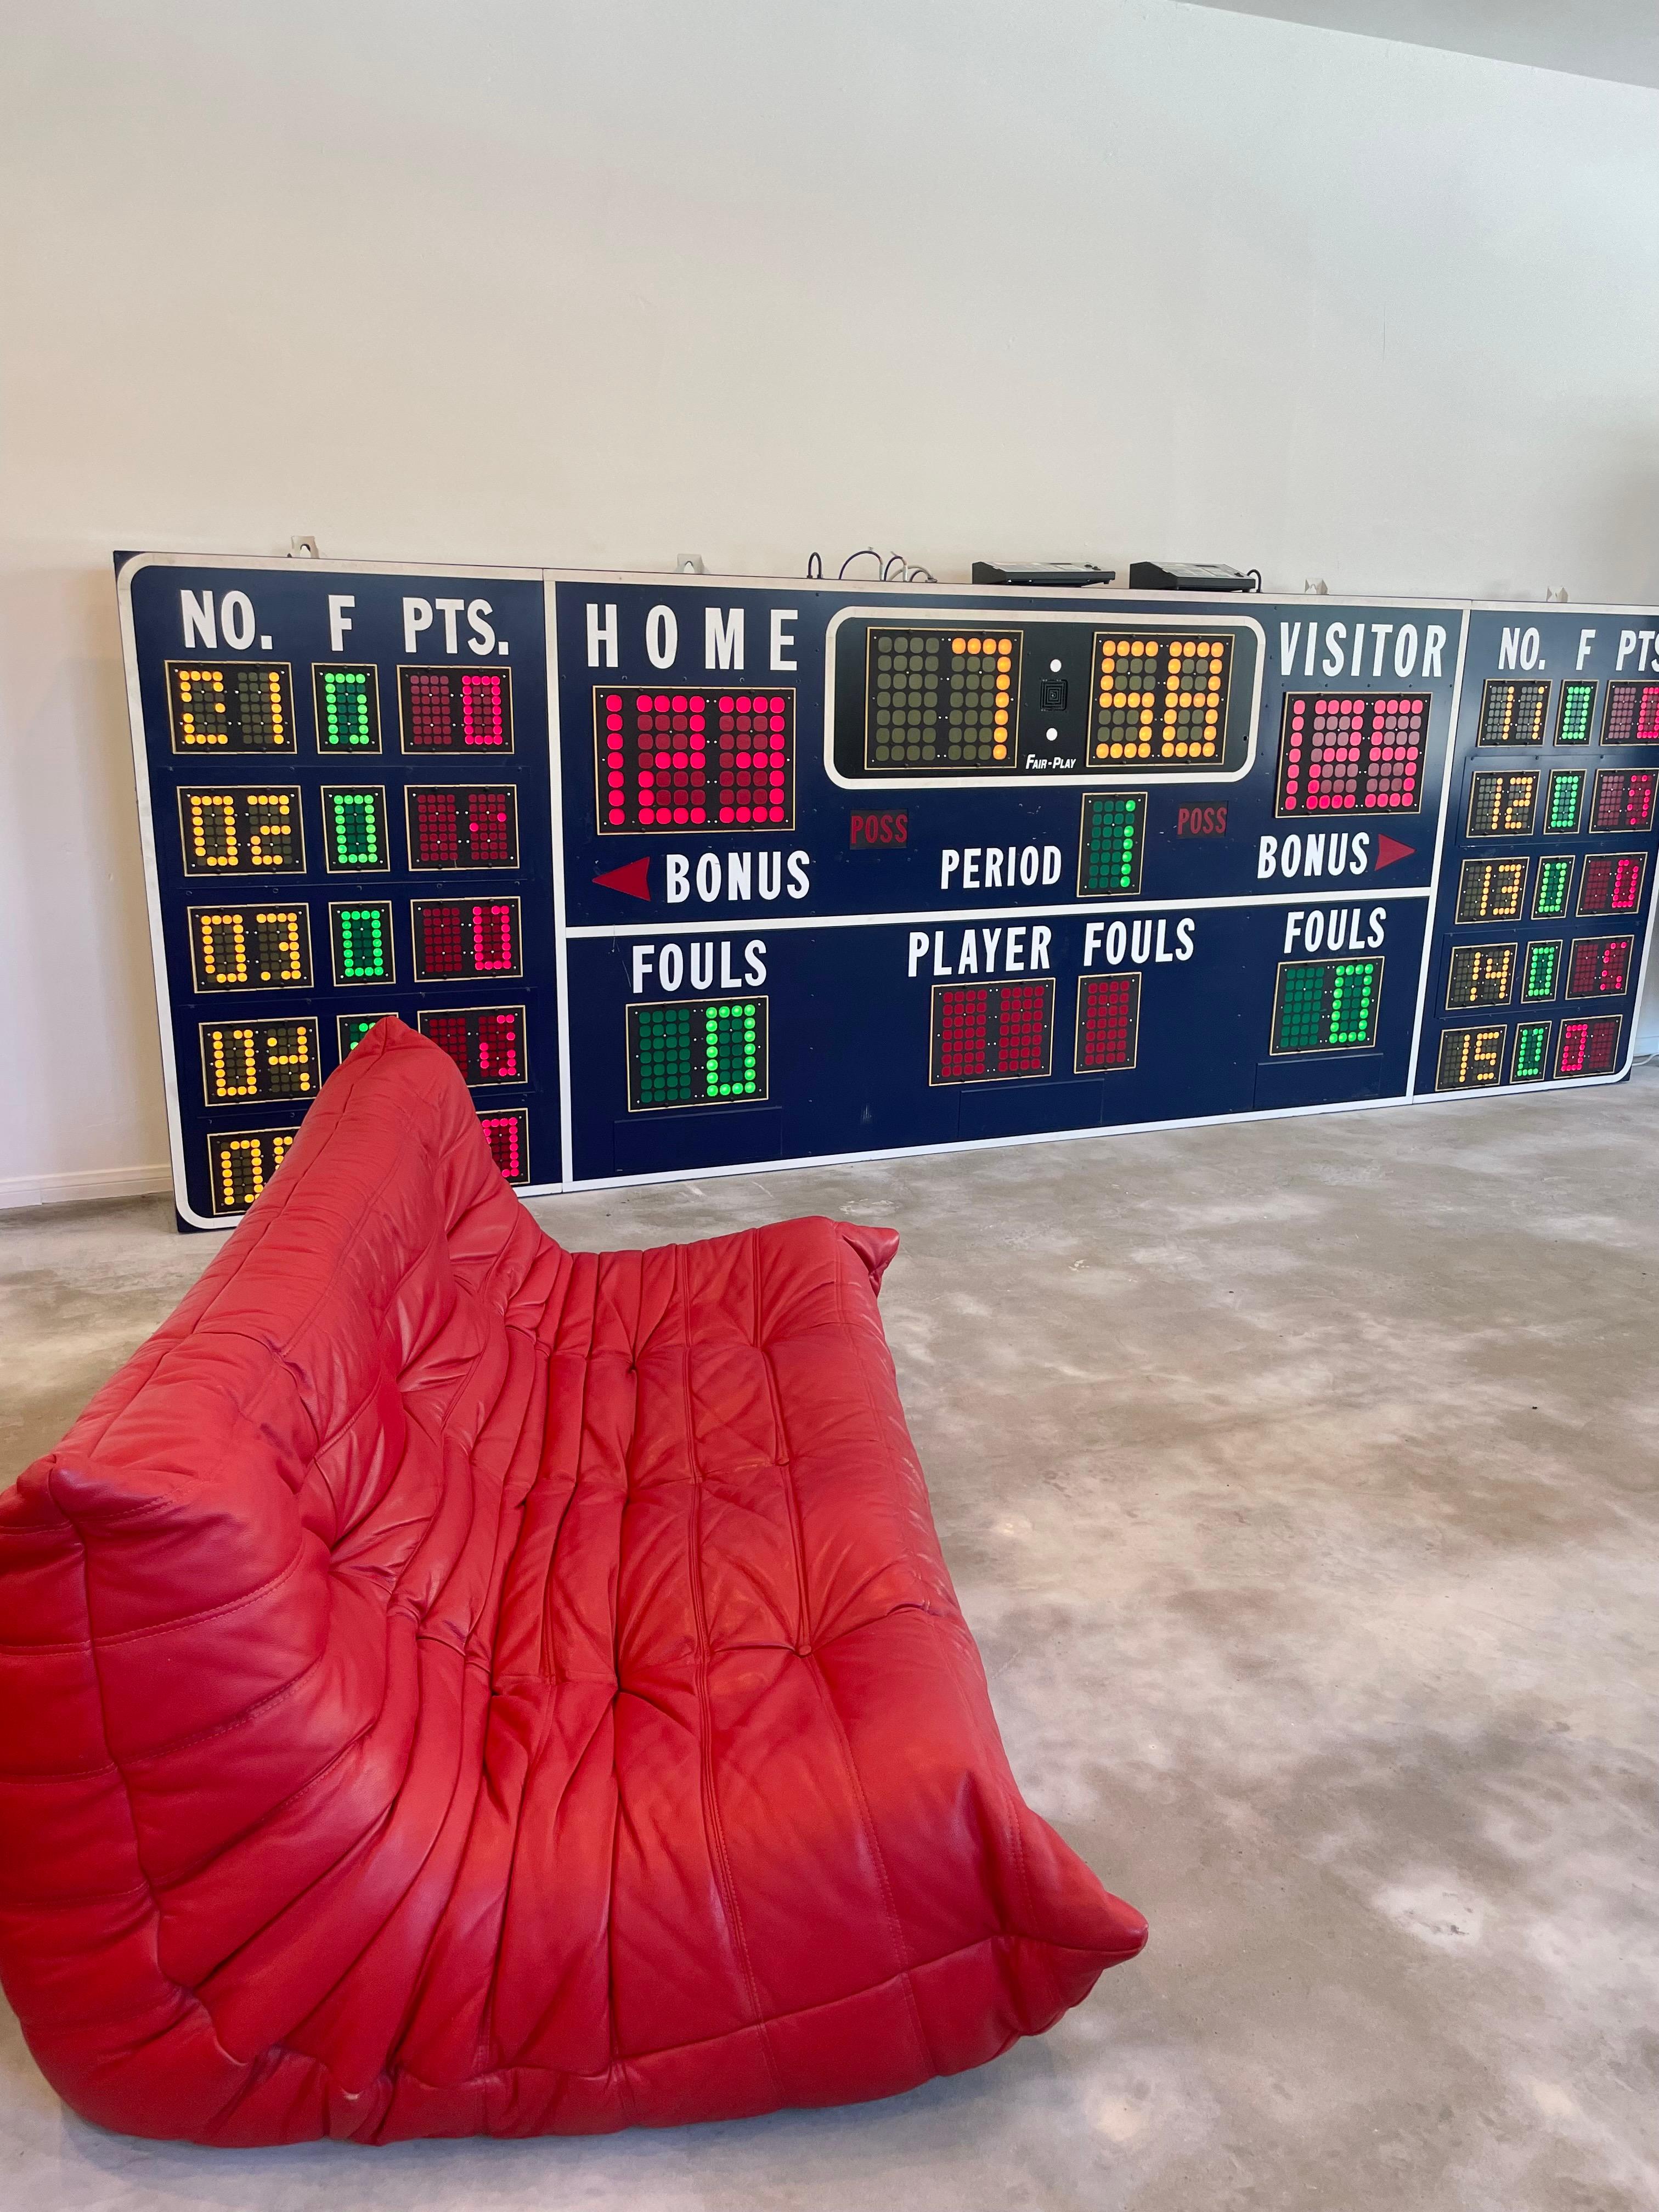 Monumental vintage basketball scoreboard by Fair Play, made in the 1980s. Extremely unusual size with the player stats on both sides. Great blue color and metal case in very good condition. Comes with two controllers to operate the entire board.